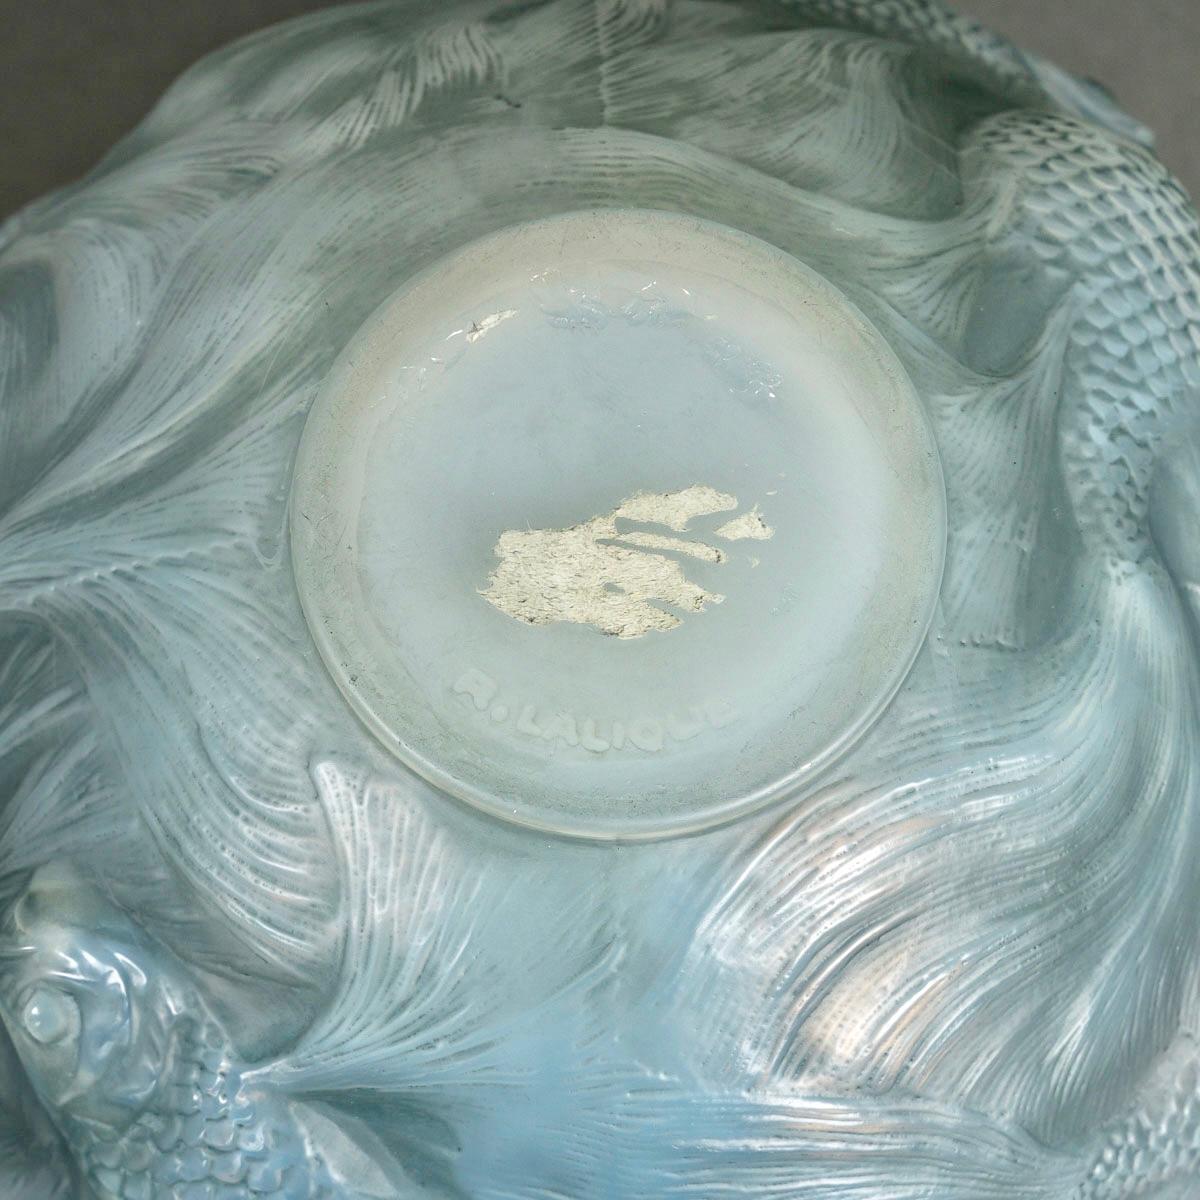 Molded 1924 Rene Lalique Vase Formose Cased Opalescent Glass with Blue Patina For Sale